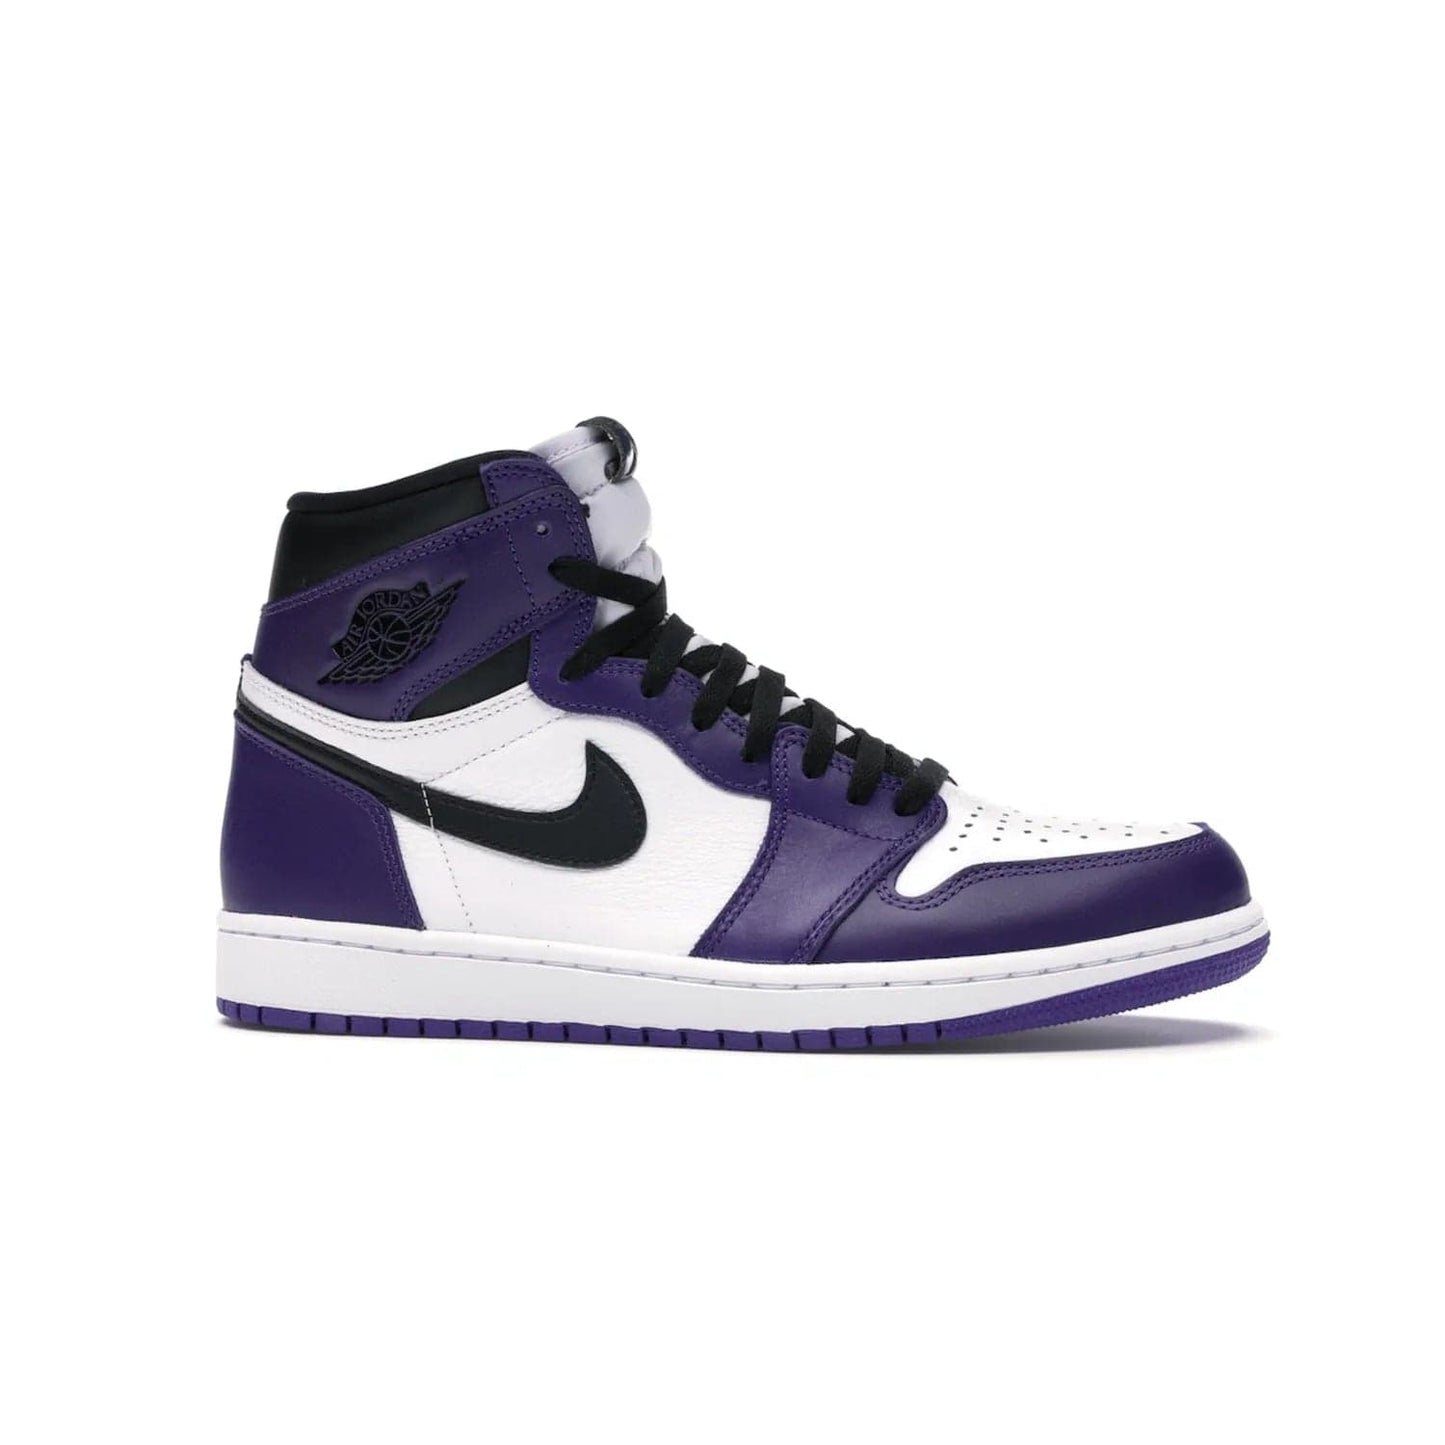 Jordan 1 Retro High Court Purple White - Image 2 - Only at www.BallersClubKickz.com - Grab the classic Jordan 1 Retro High Court Purple White and add major flavor to your collection. White leather upper with Court Purple overlays and Swoosh logo. White midsole and purple outsole. Get yours and rep your Jordan Brand.